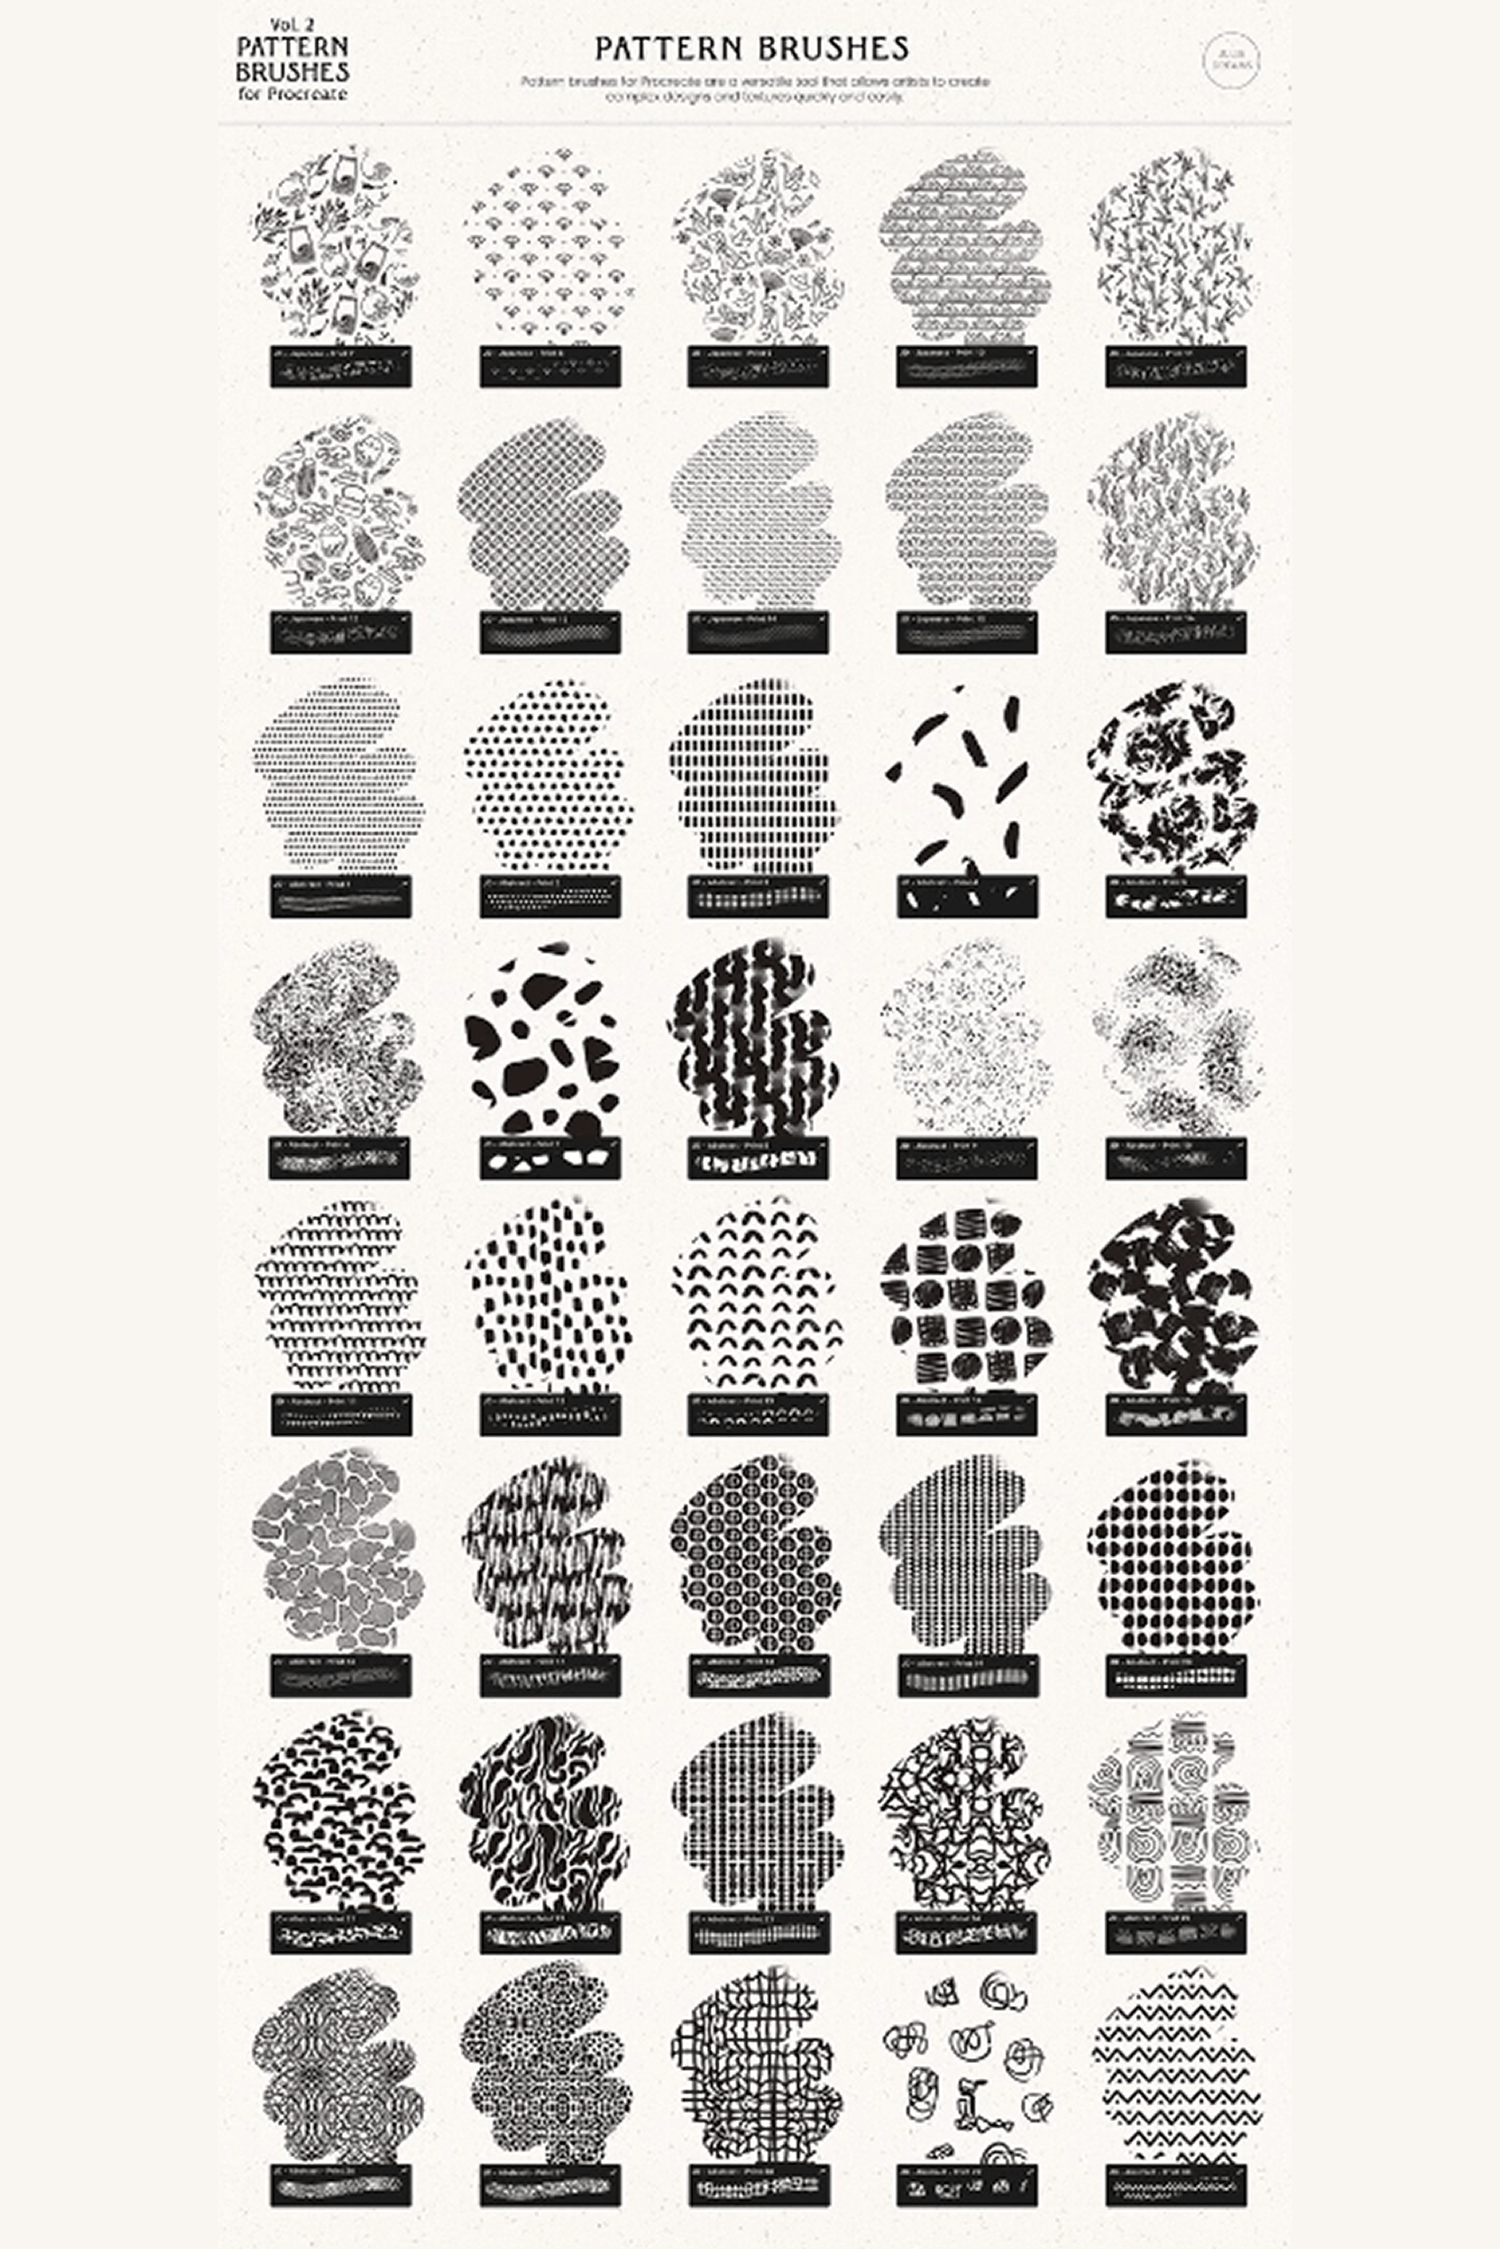 Pattern Brushes Vol 2 by Julia Dreams